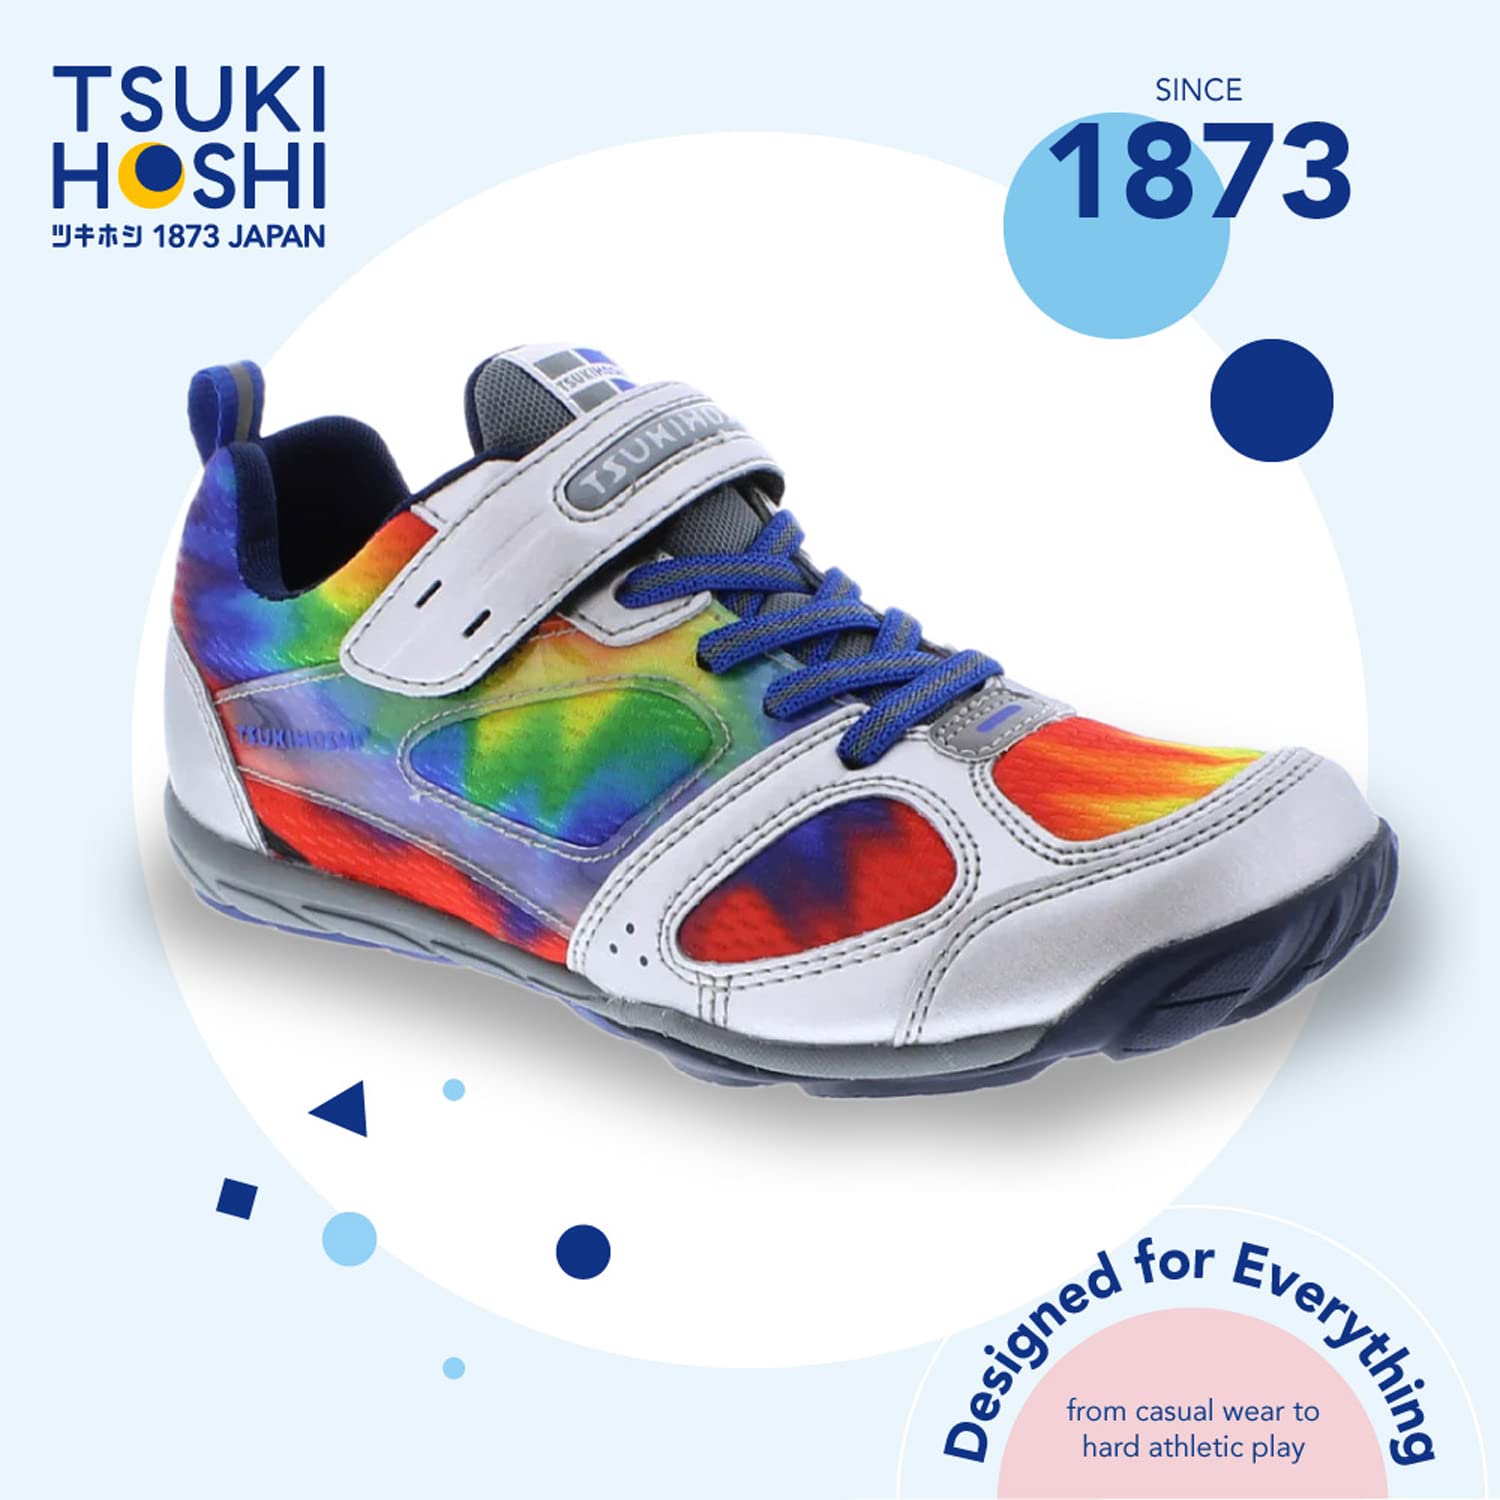 TSUKIHOSHI 4810 MAKO Strap-Closure Machine-Washable Youth Athletic and Running Shoe with Wide Toe Box and Slip-Resistant, Non-Marking Outsole